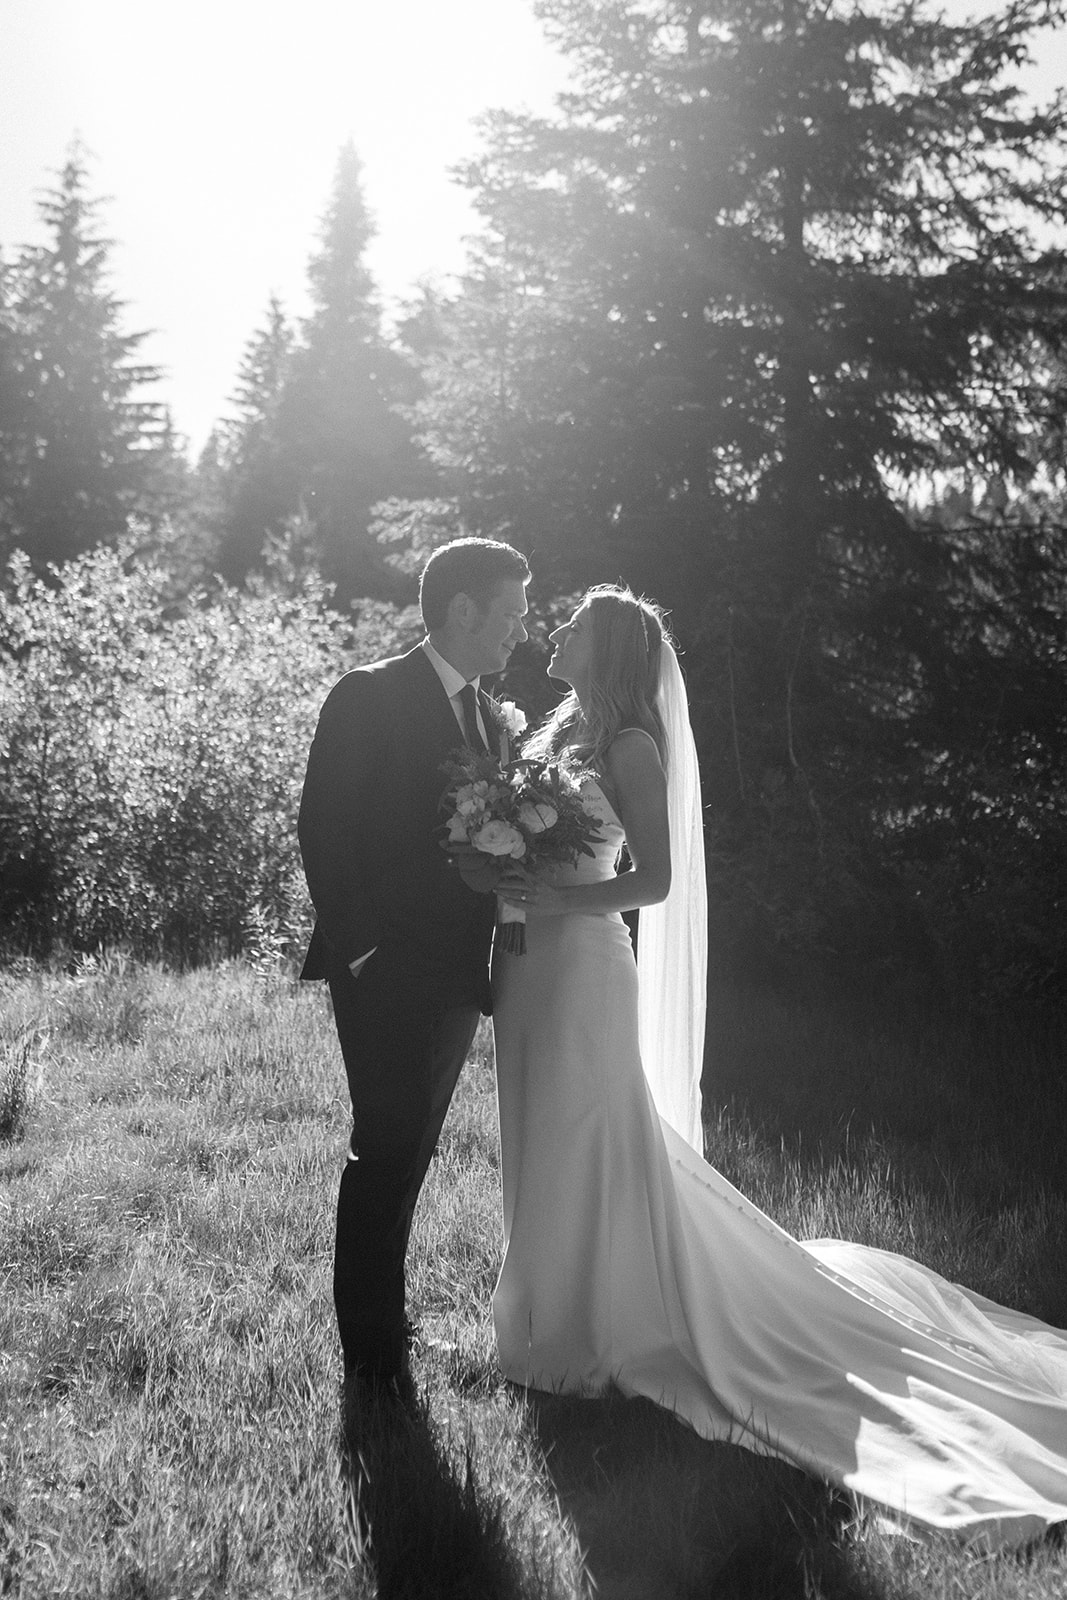 A Romantic Outdoor Wedding Day At Gold Creek Pond in Washington